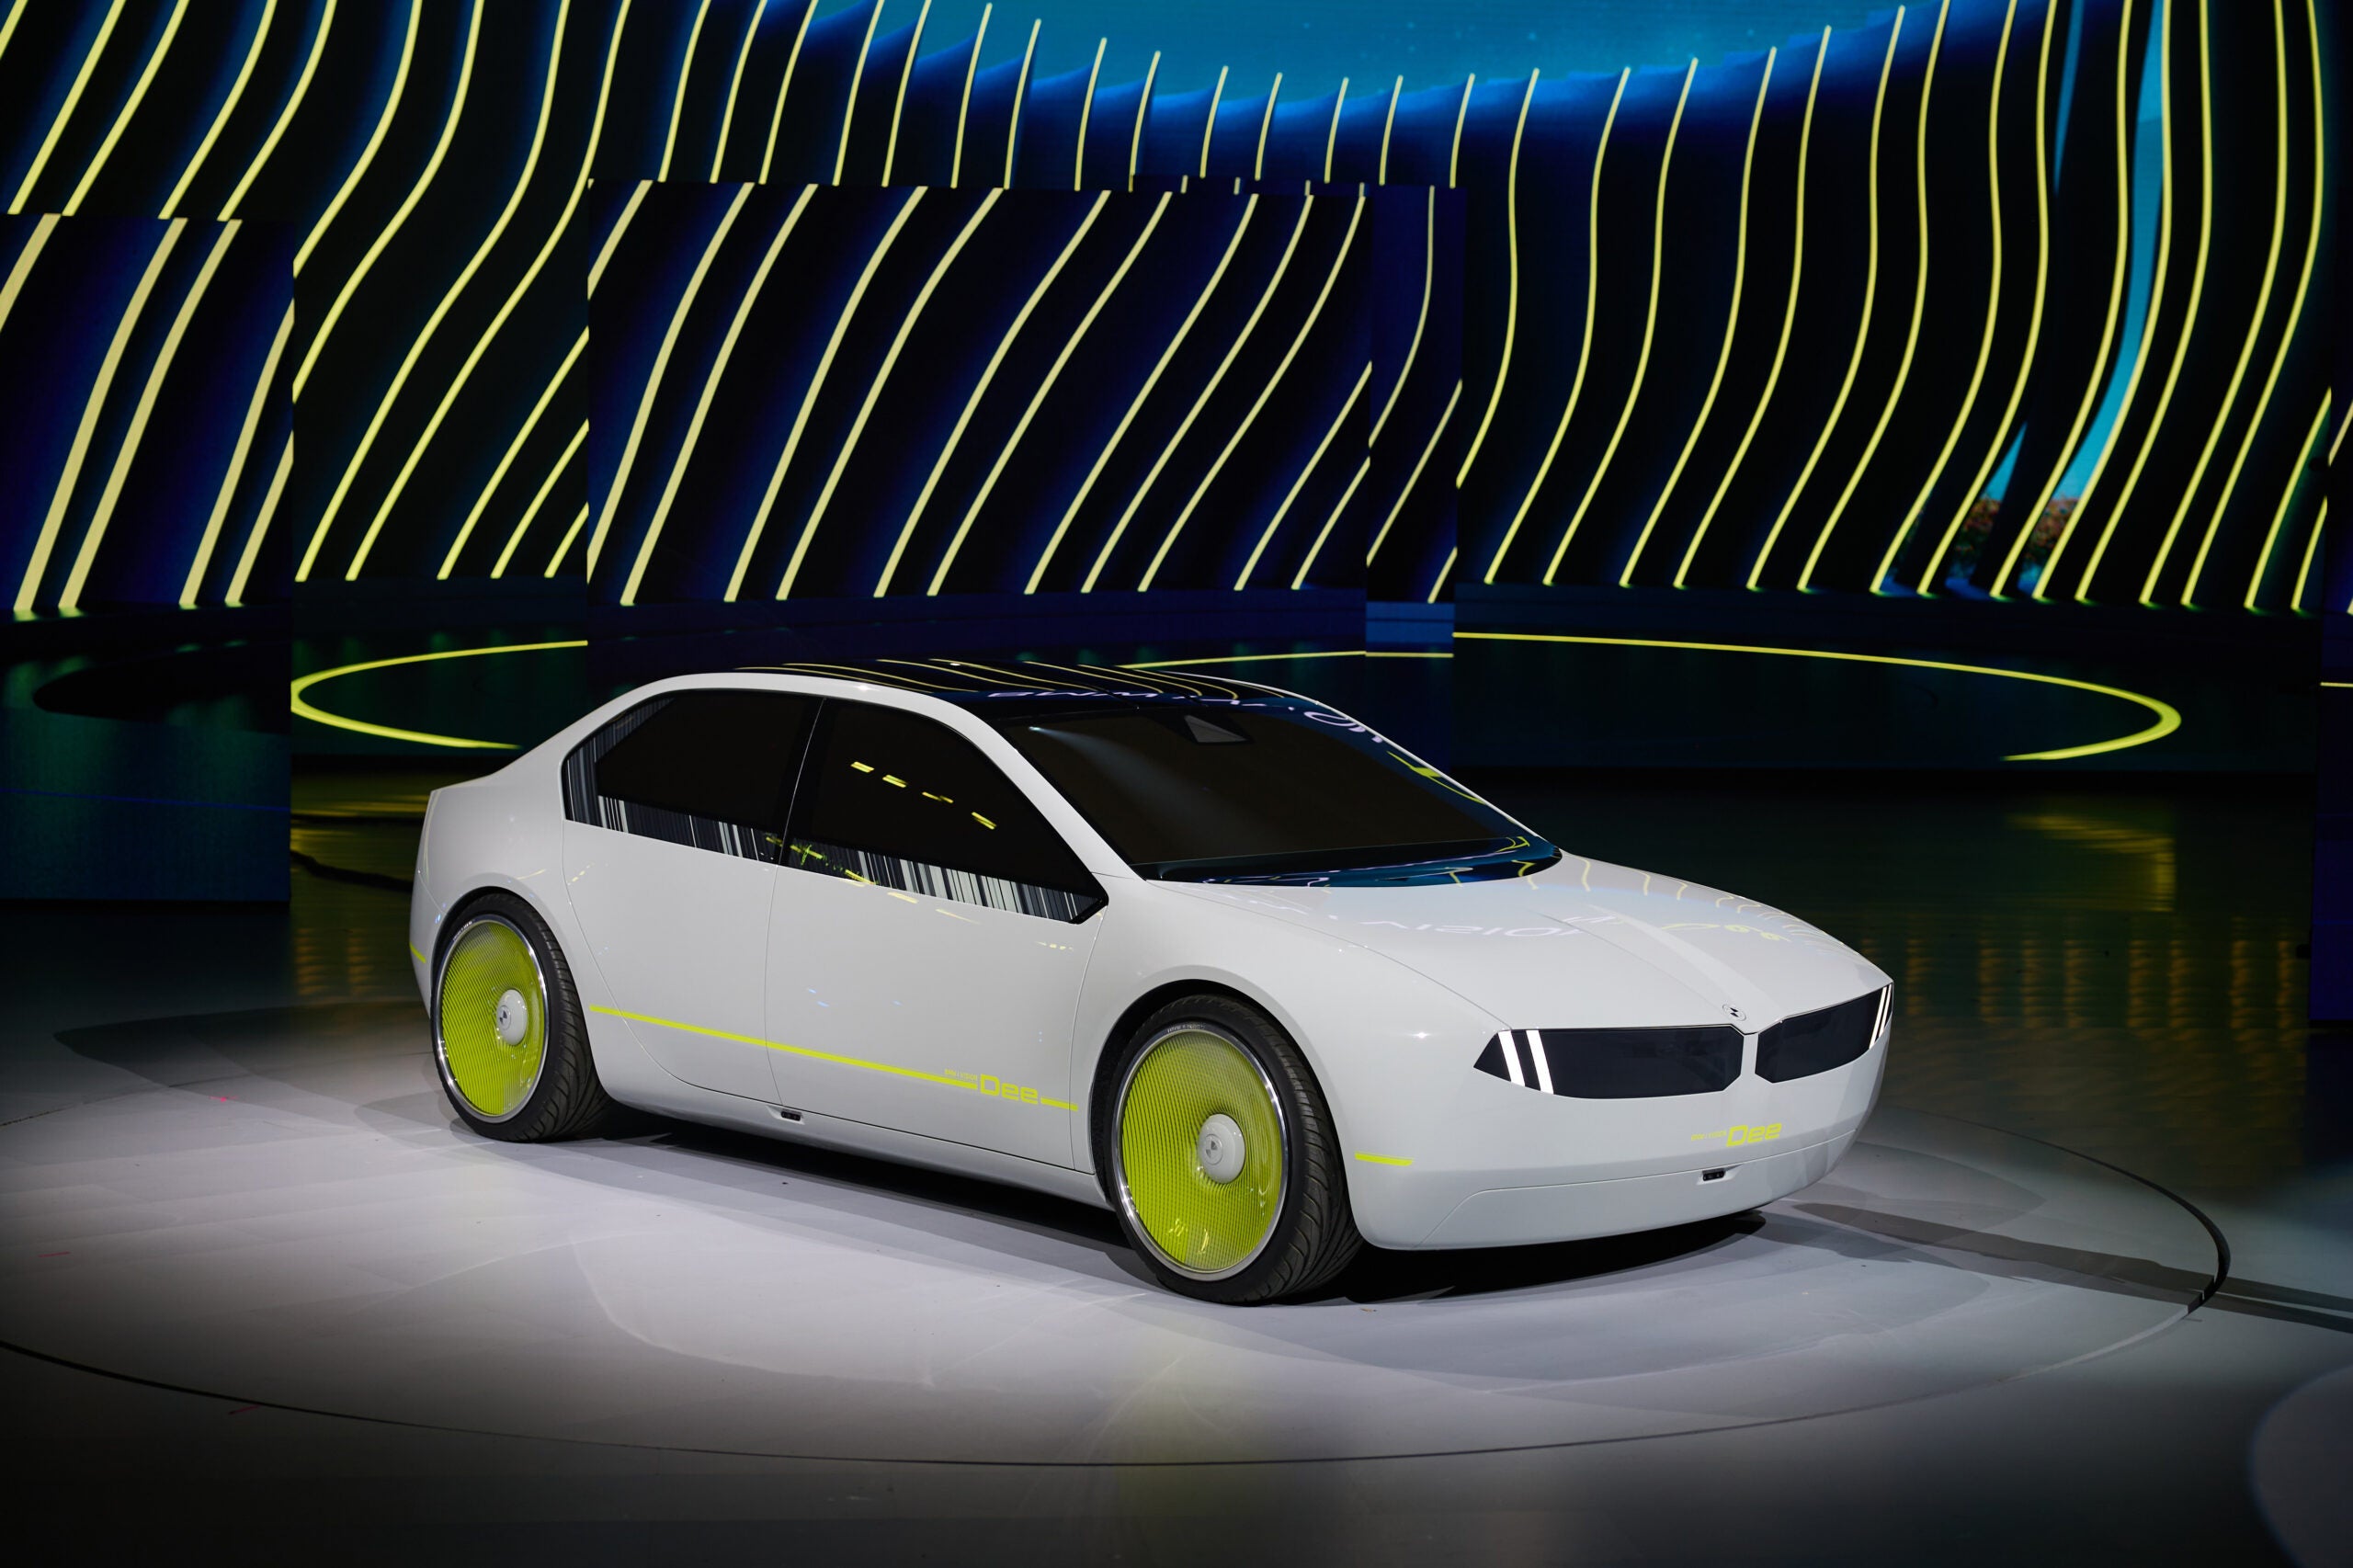 A stage with a white Dee BMW electric car concept car